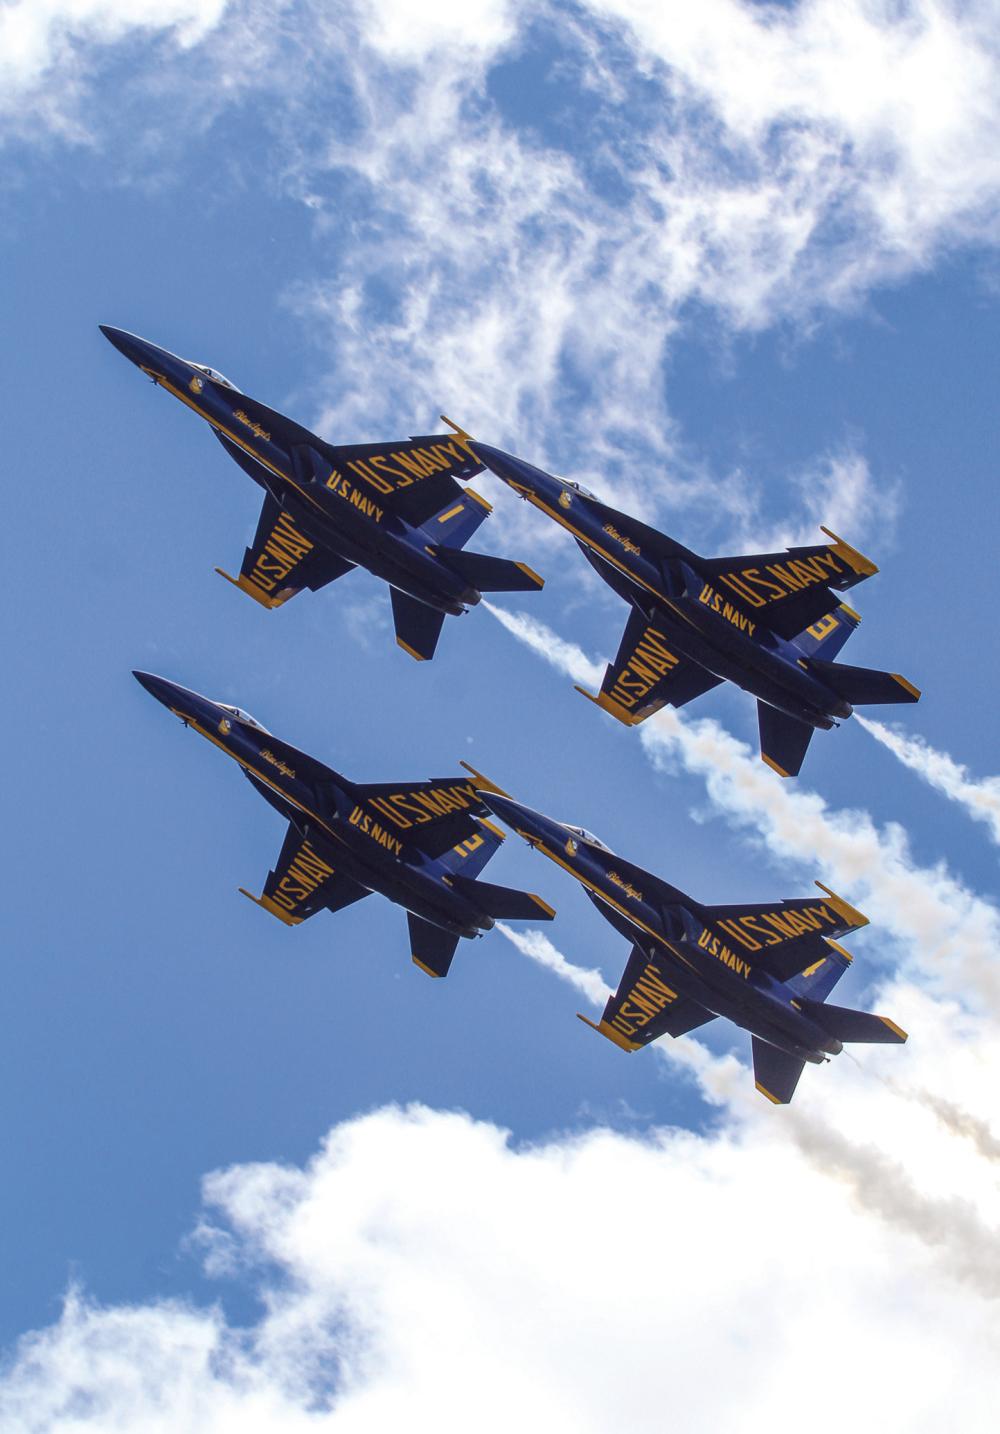 The Blue Angels soared over Leelanau County on Saturday and Sunday during the National Cherry Festival. Thousands of people gather along the shores of Grellickville up to Suttons Bay to watch the thrilling show. Enterprise photo by Brian Freiberger